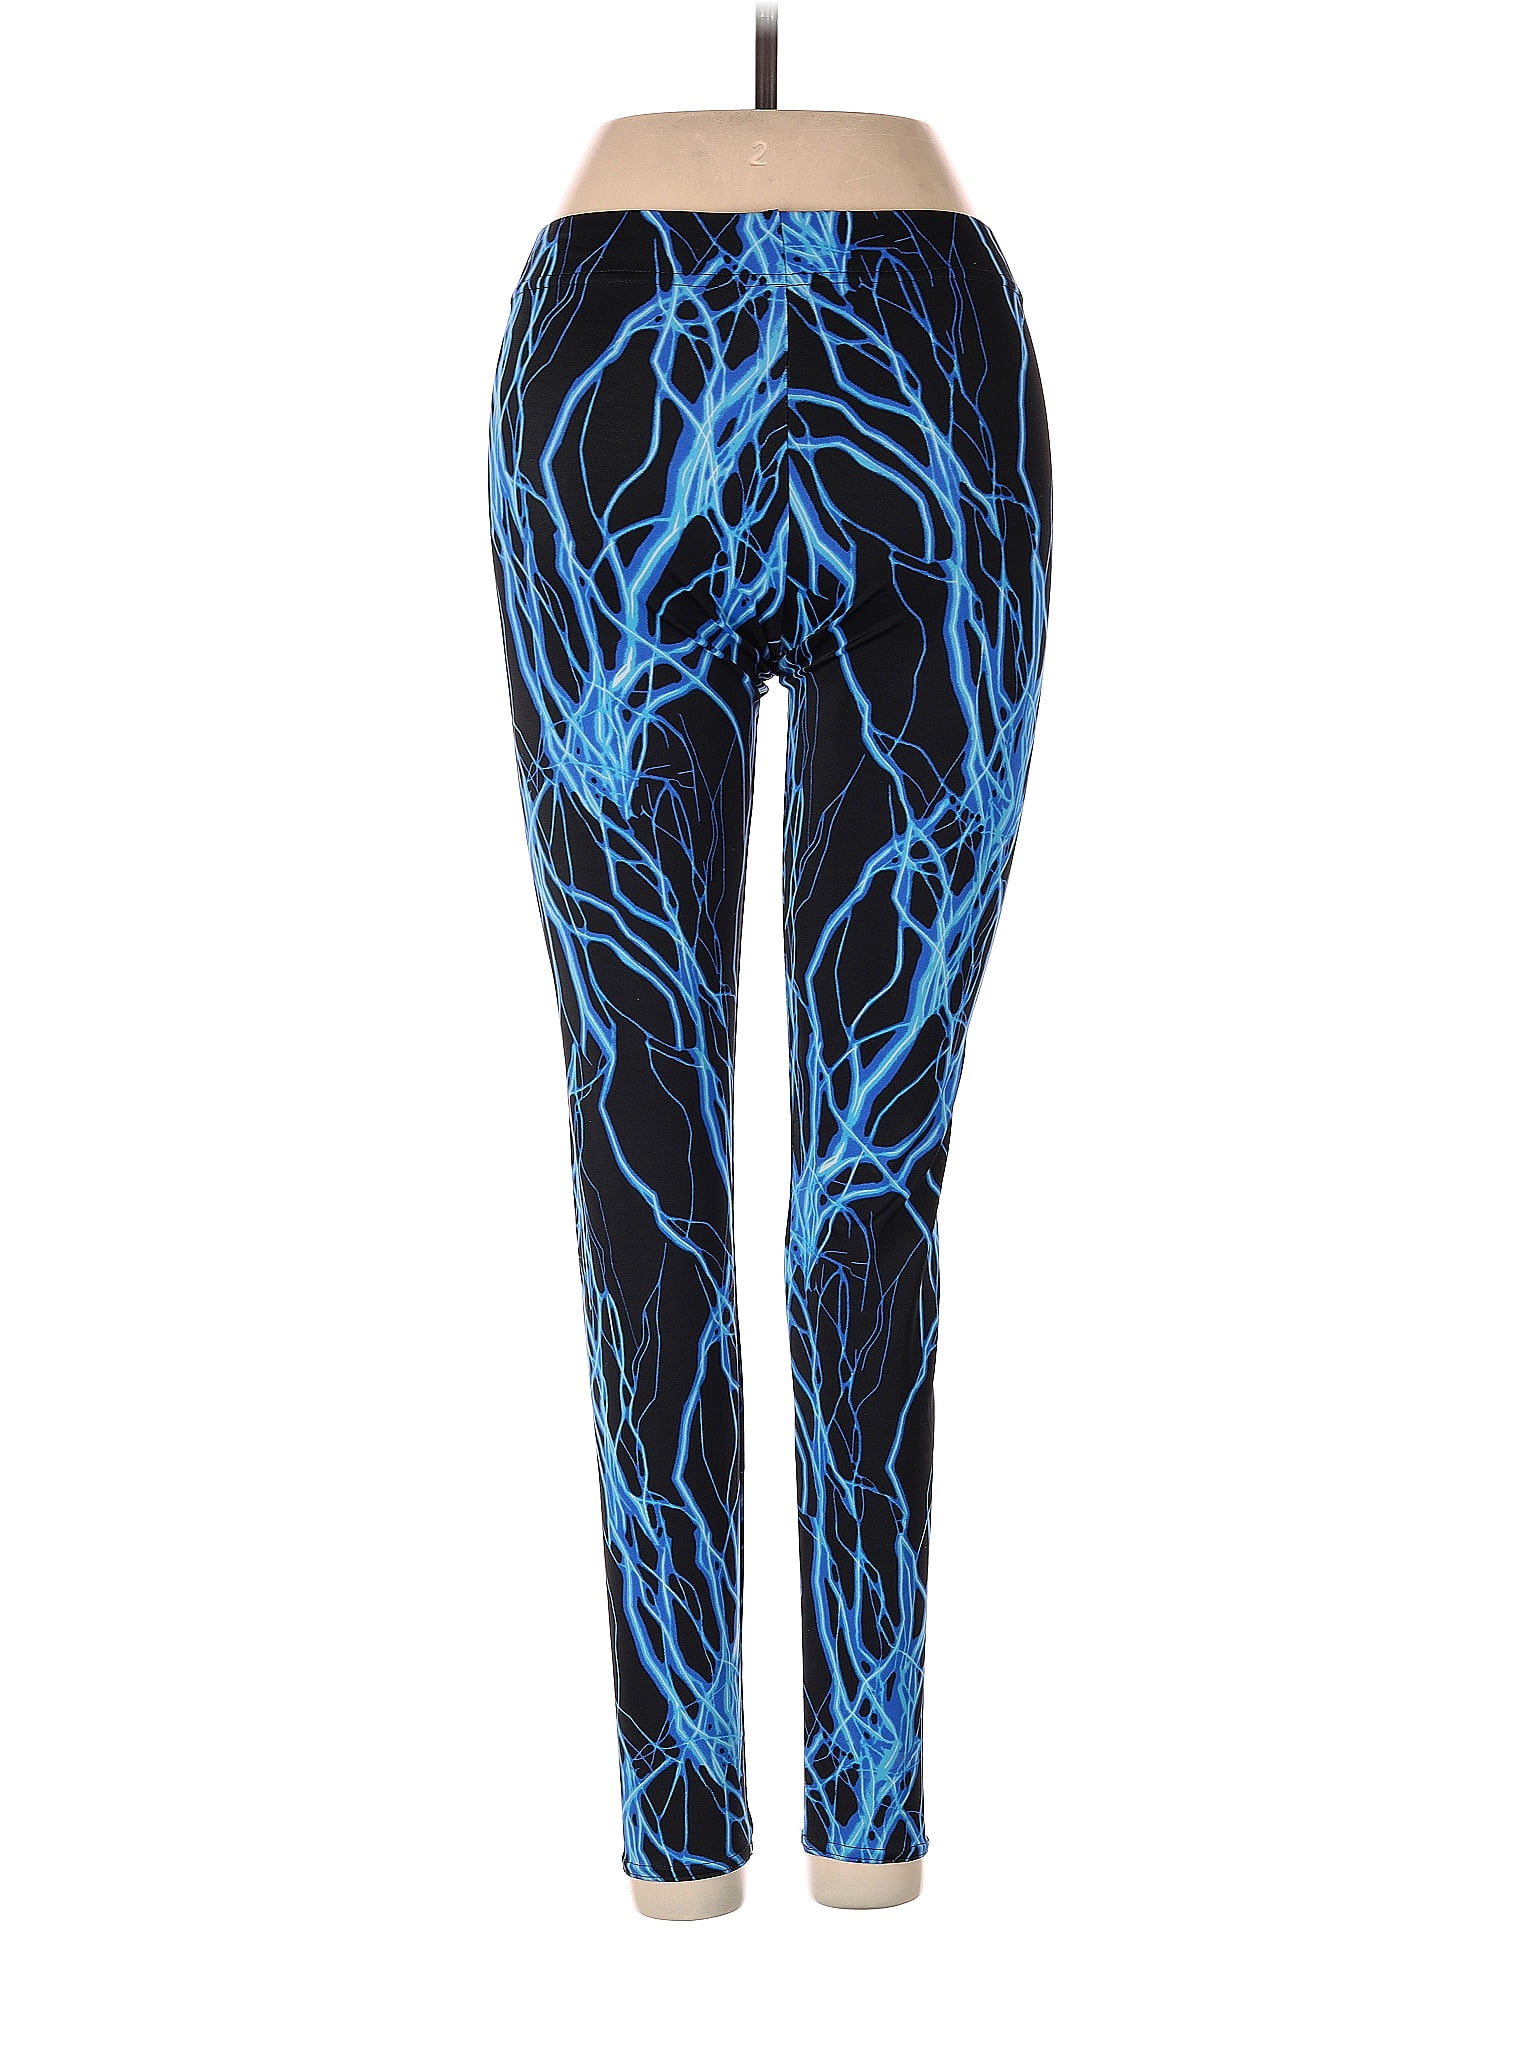 BlackMilk Women's Pants On Sale Up To 90% Off Retail